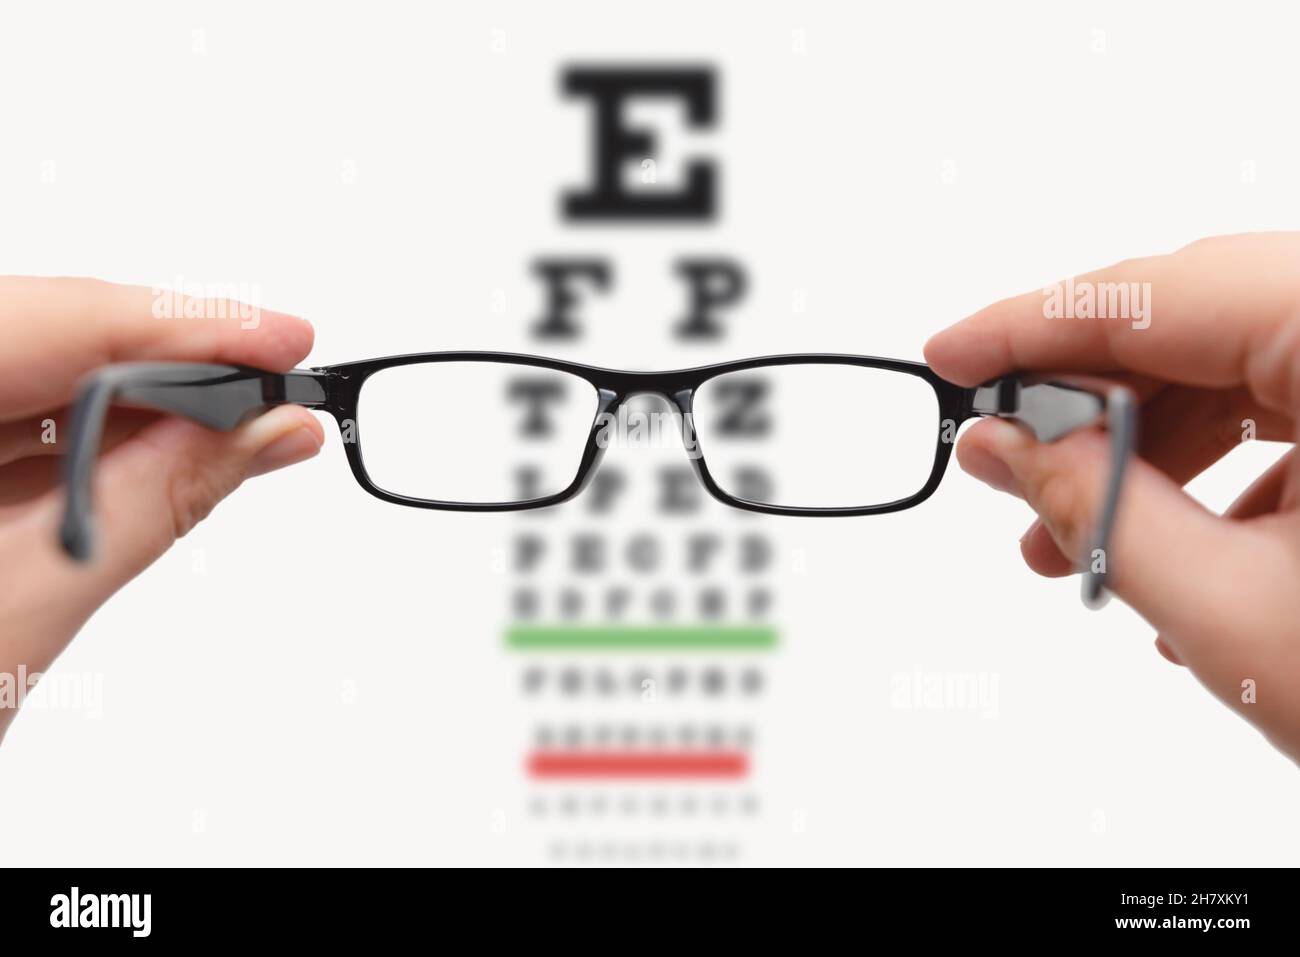 https://c8.alamy.com/comp/2H7XKY1/glasses-and-snellens-chart-test-eye-examination-optician-ophthalmologist-concept-2H7XKY1.jpg